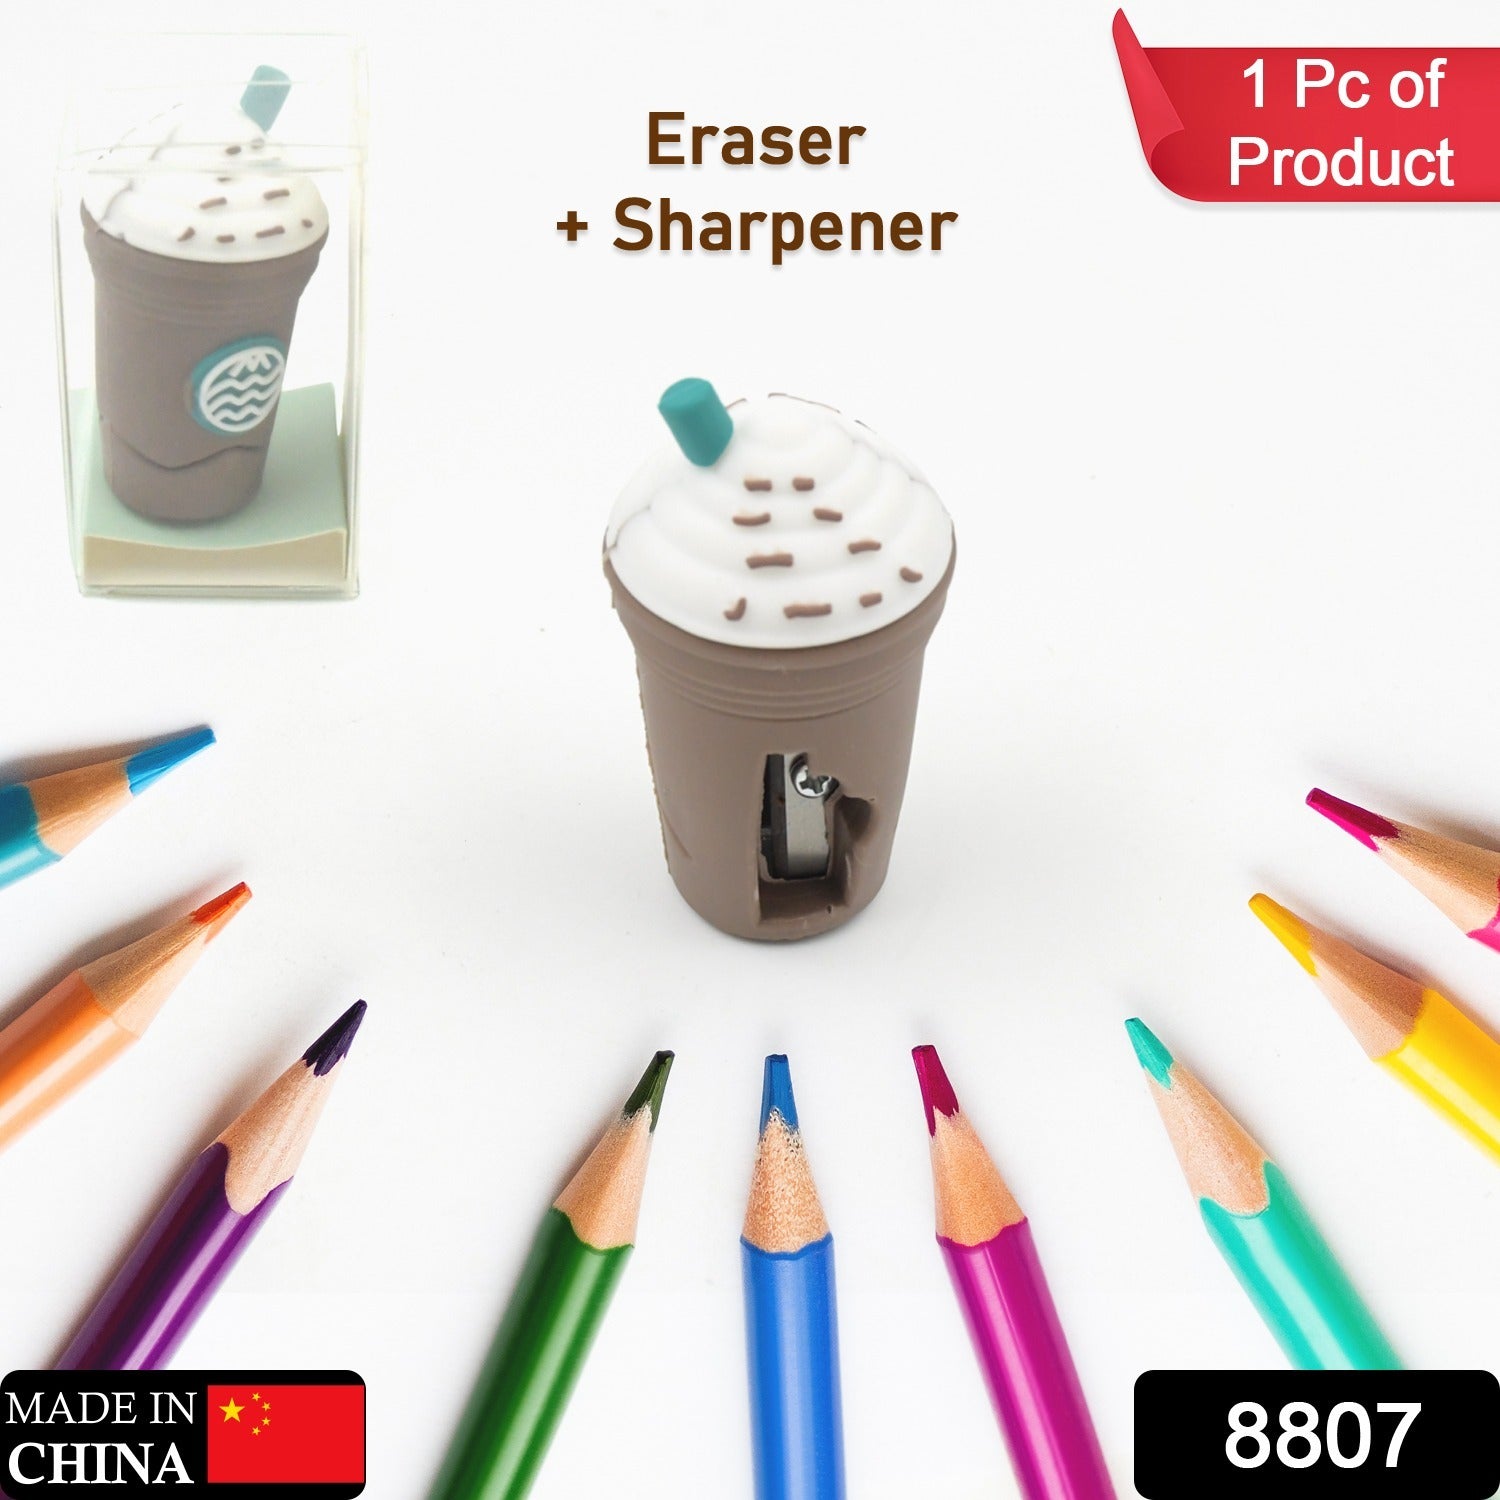 2In1 3D Cute Coffee Or Ice cream Shape sharpner Like Rotary Manual Pencil Sharpener for Kids  Ice Cream Style Office School Supplies, Back to School Gift for Students,Kids Educational Stationary kit, B'Day Return Gift - deal99.in